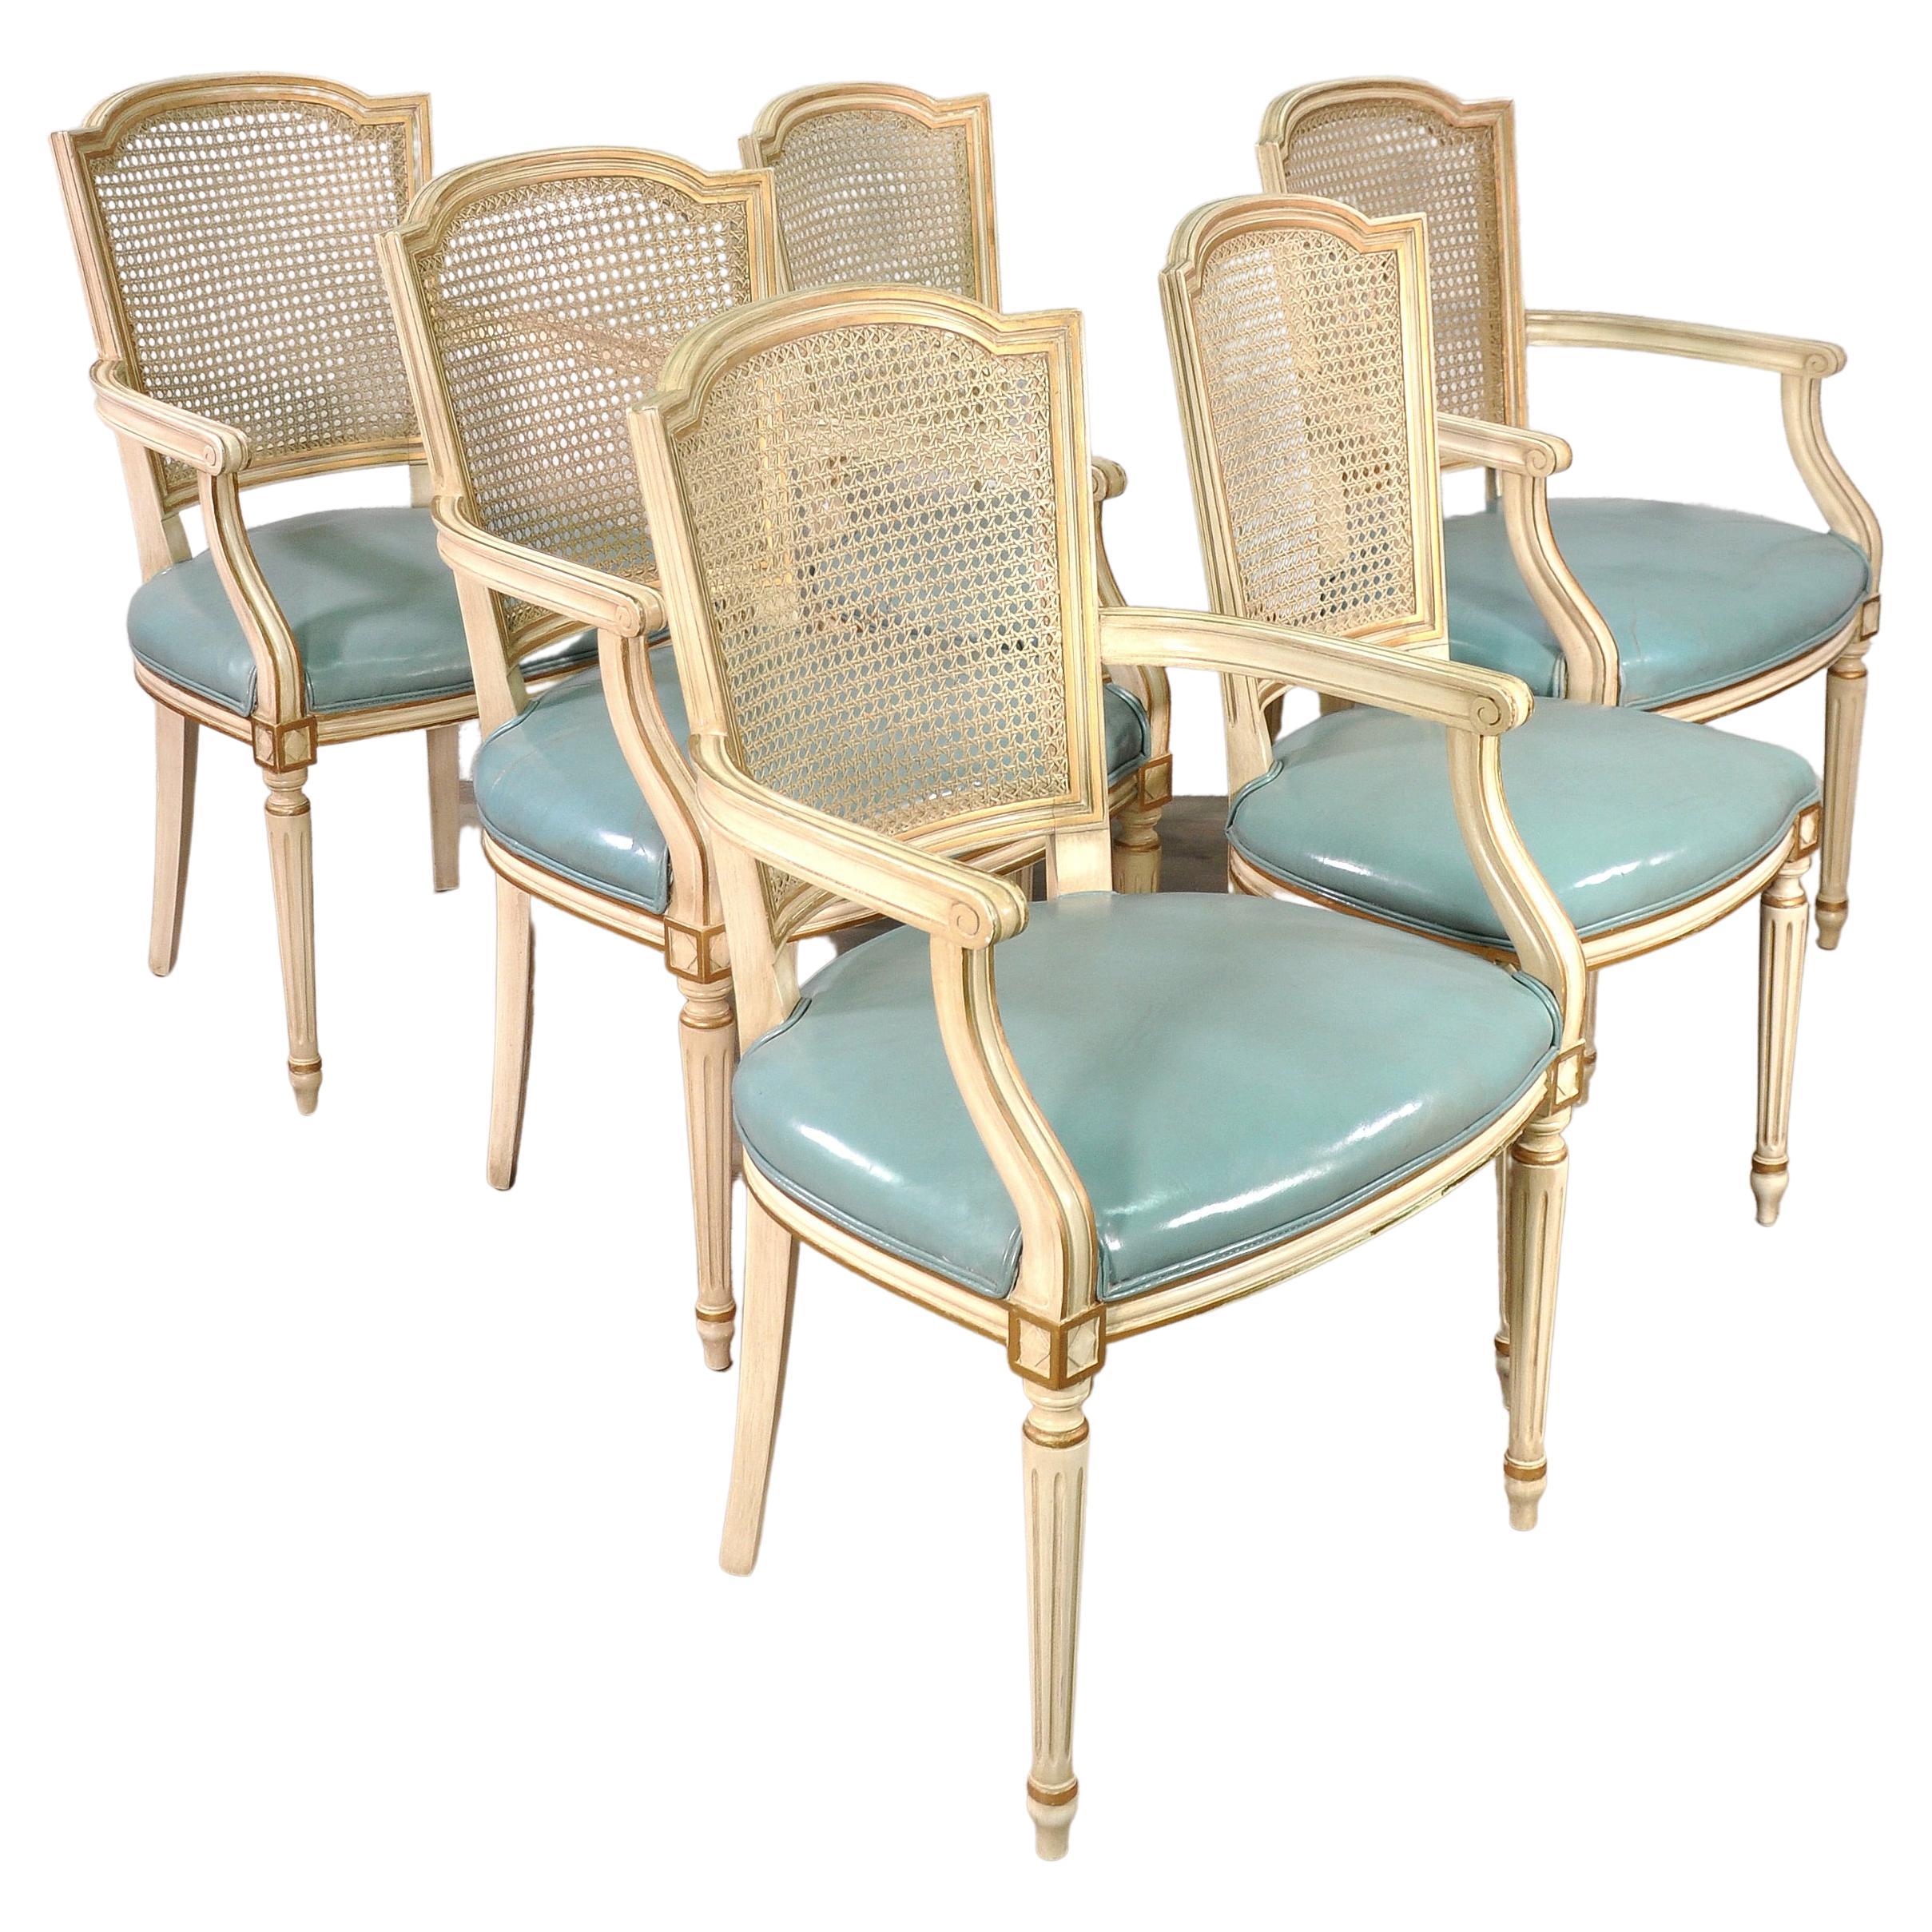 Set of 6 French Louis XVI Style Painted and Gilt Dining Chairs with Rattan Backs, the perfect choice for timeless Neoclassical styling with fine dining comfort! The shield shaped seatbacks are caned for light weight and ideal for warm climates. The